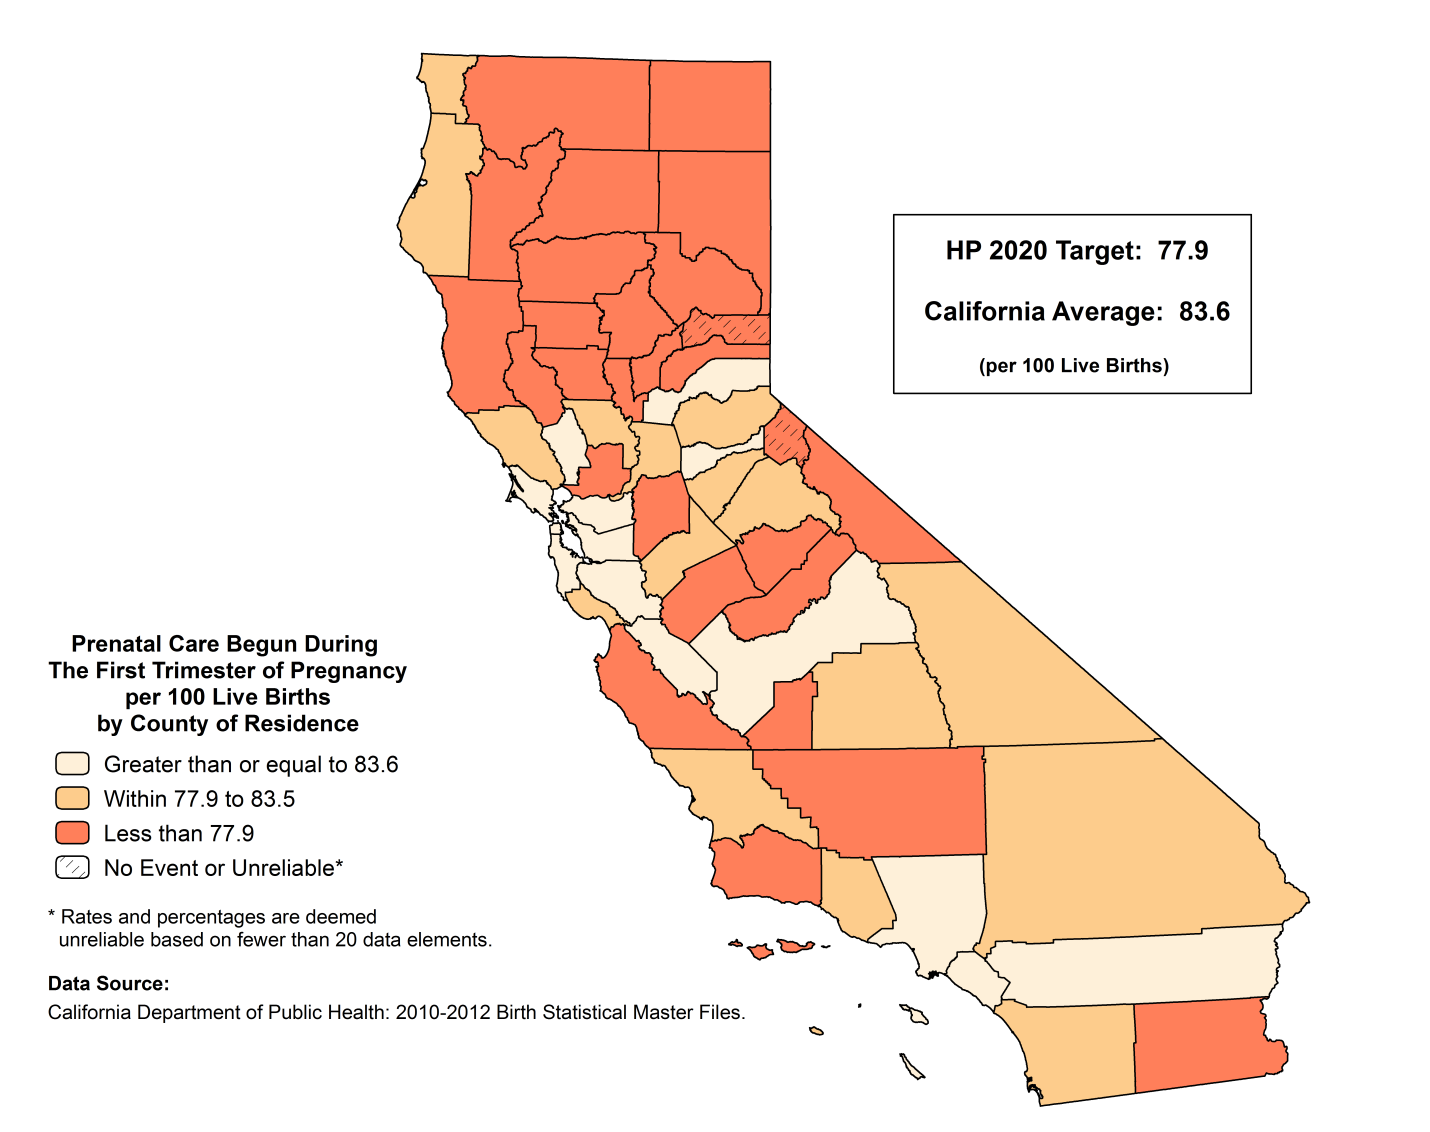 PRENATAL CARE BEGUN DURING THE FIRST TRIMESTER OF PREGNANCY, 2010-2012 T he percentage of births to mothers with prenatal care begun during the first trimester of pregnancy for California was 83.